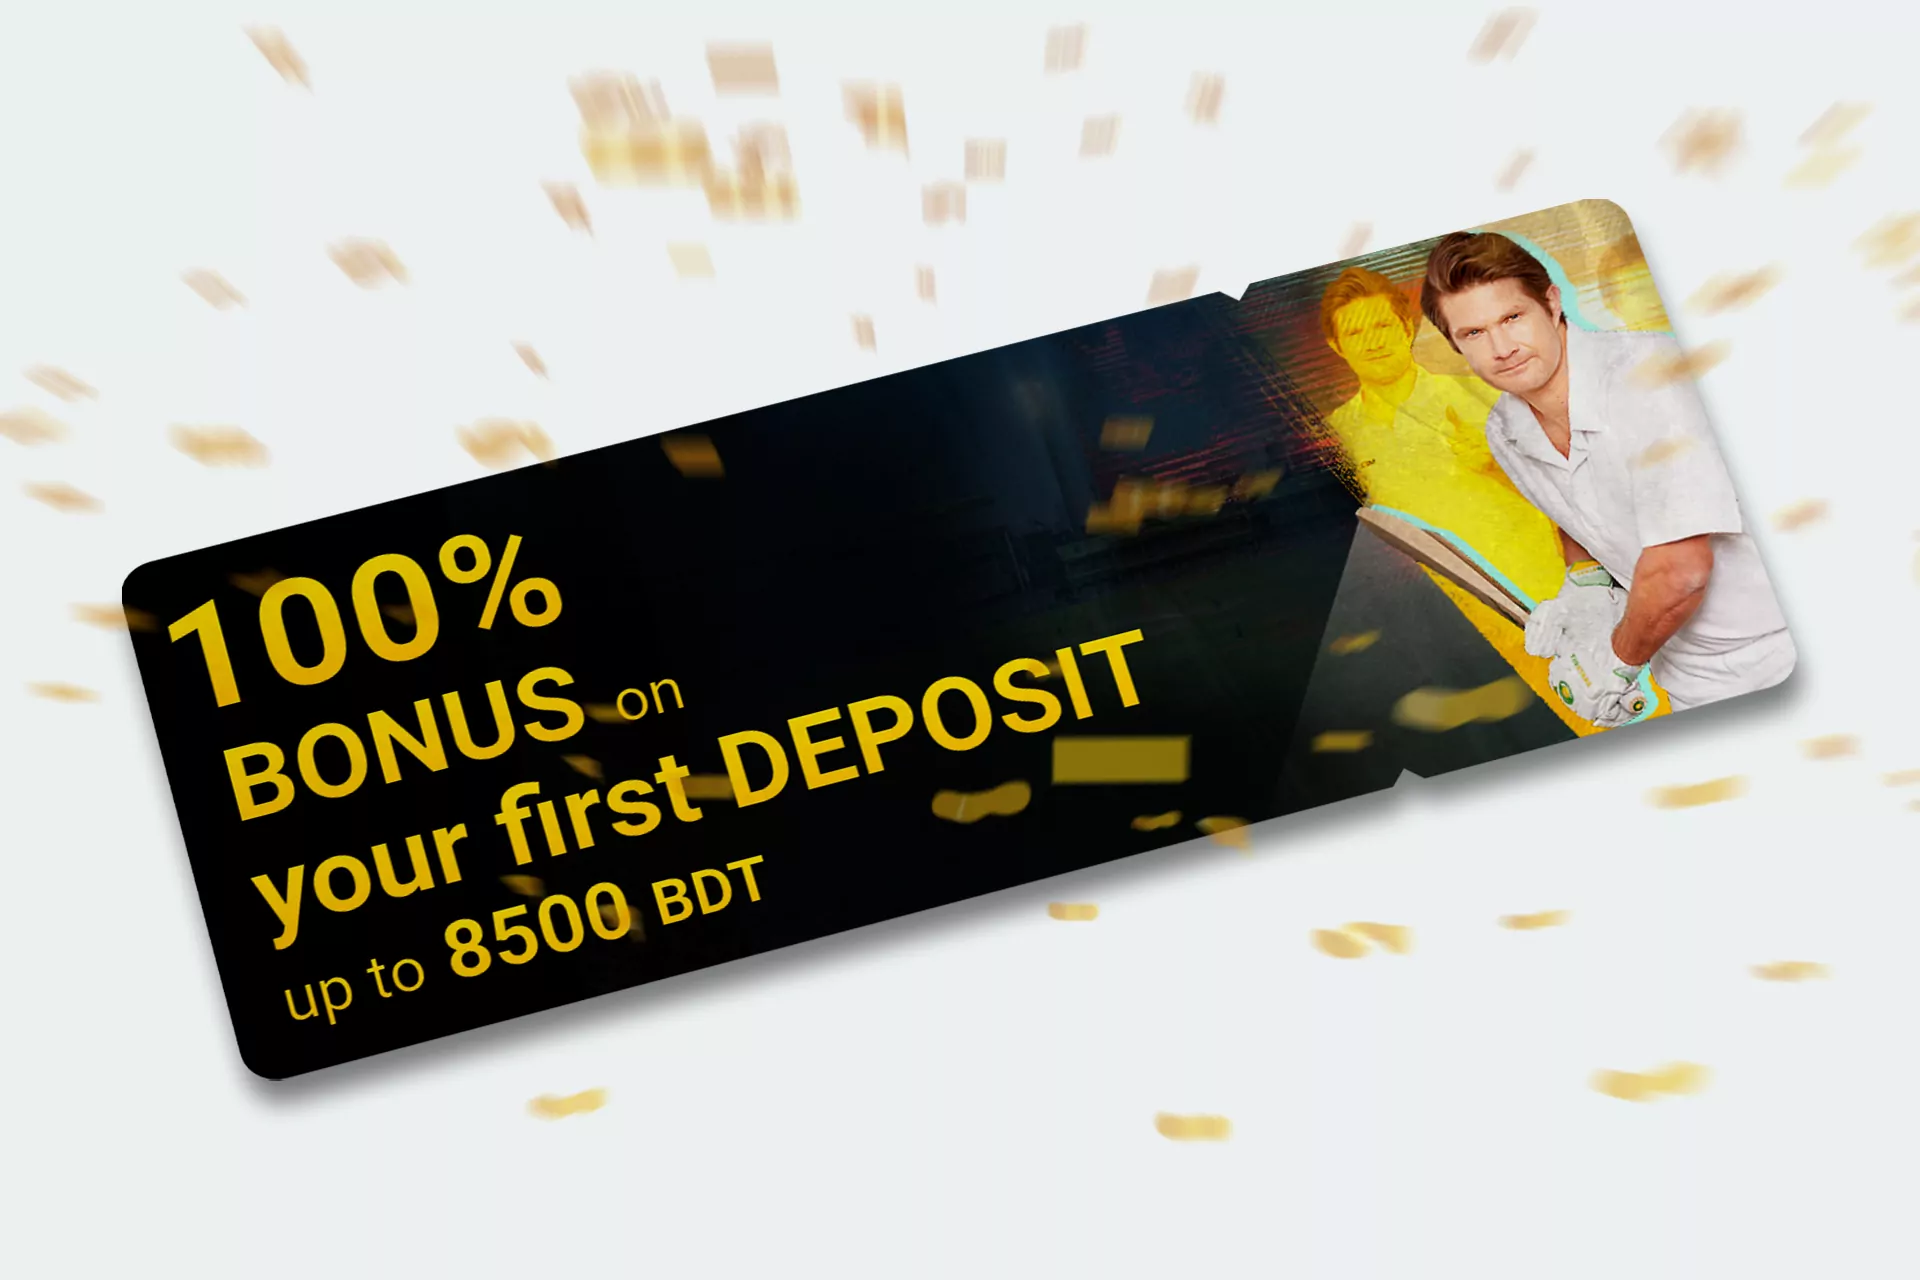 After you make a deposit, you can get a bonus on betting.